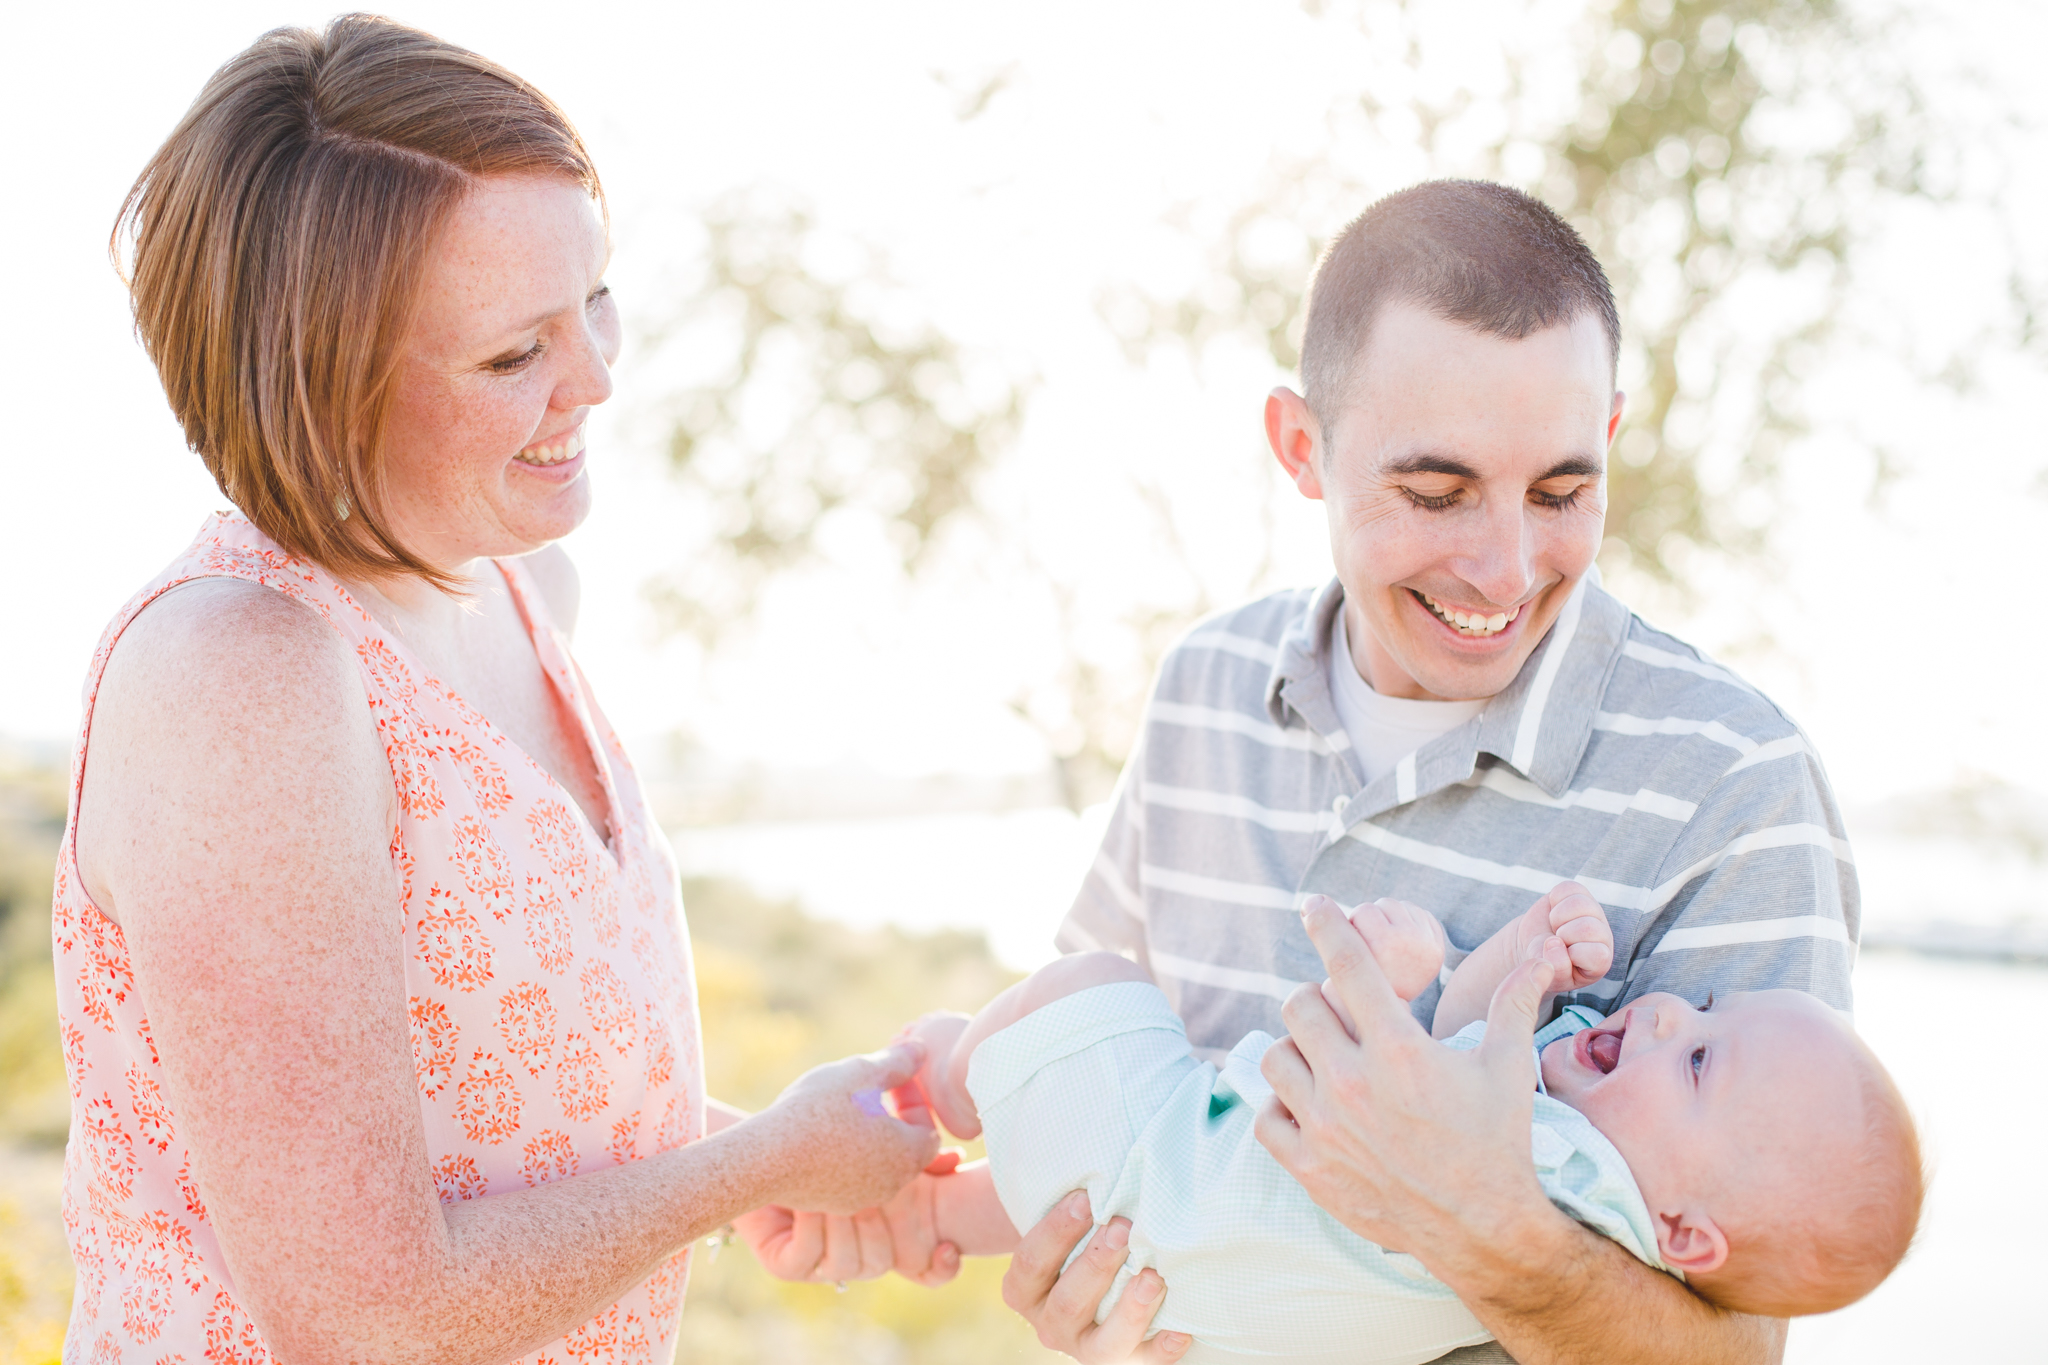 phoenix family photographer adorable baby smiling picture turner